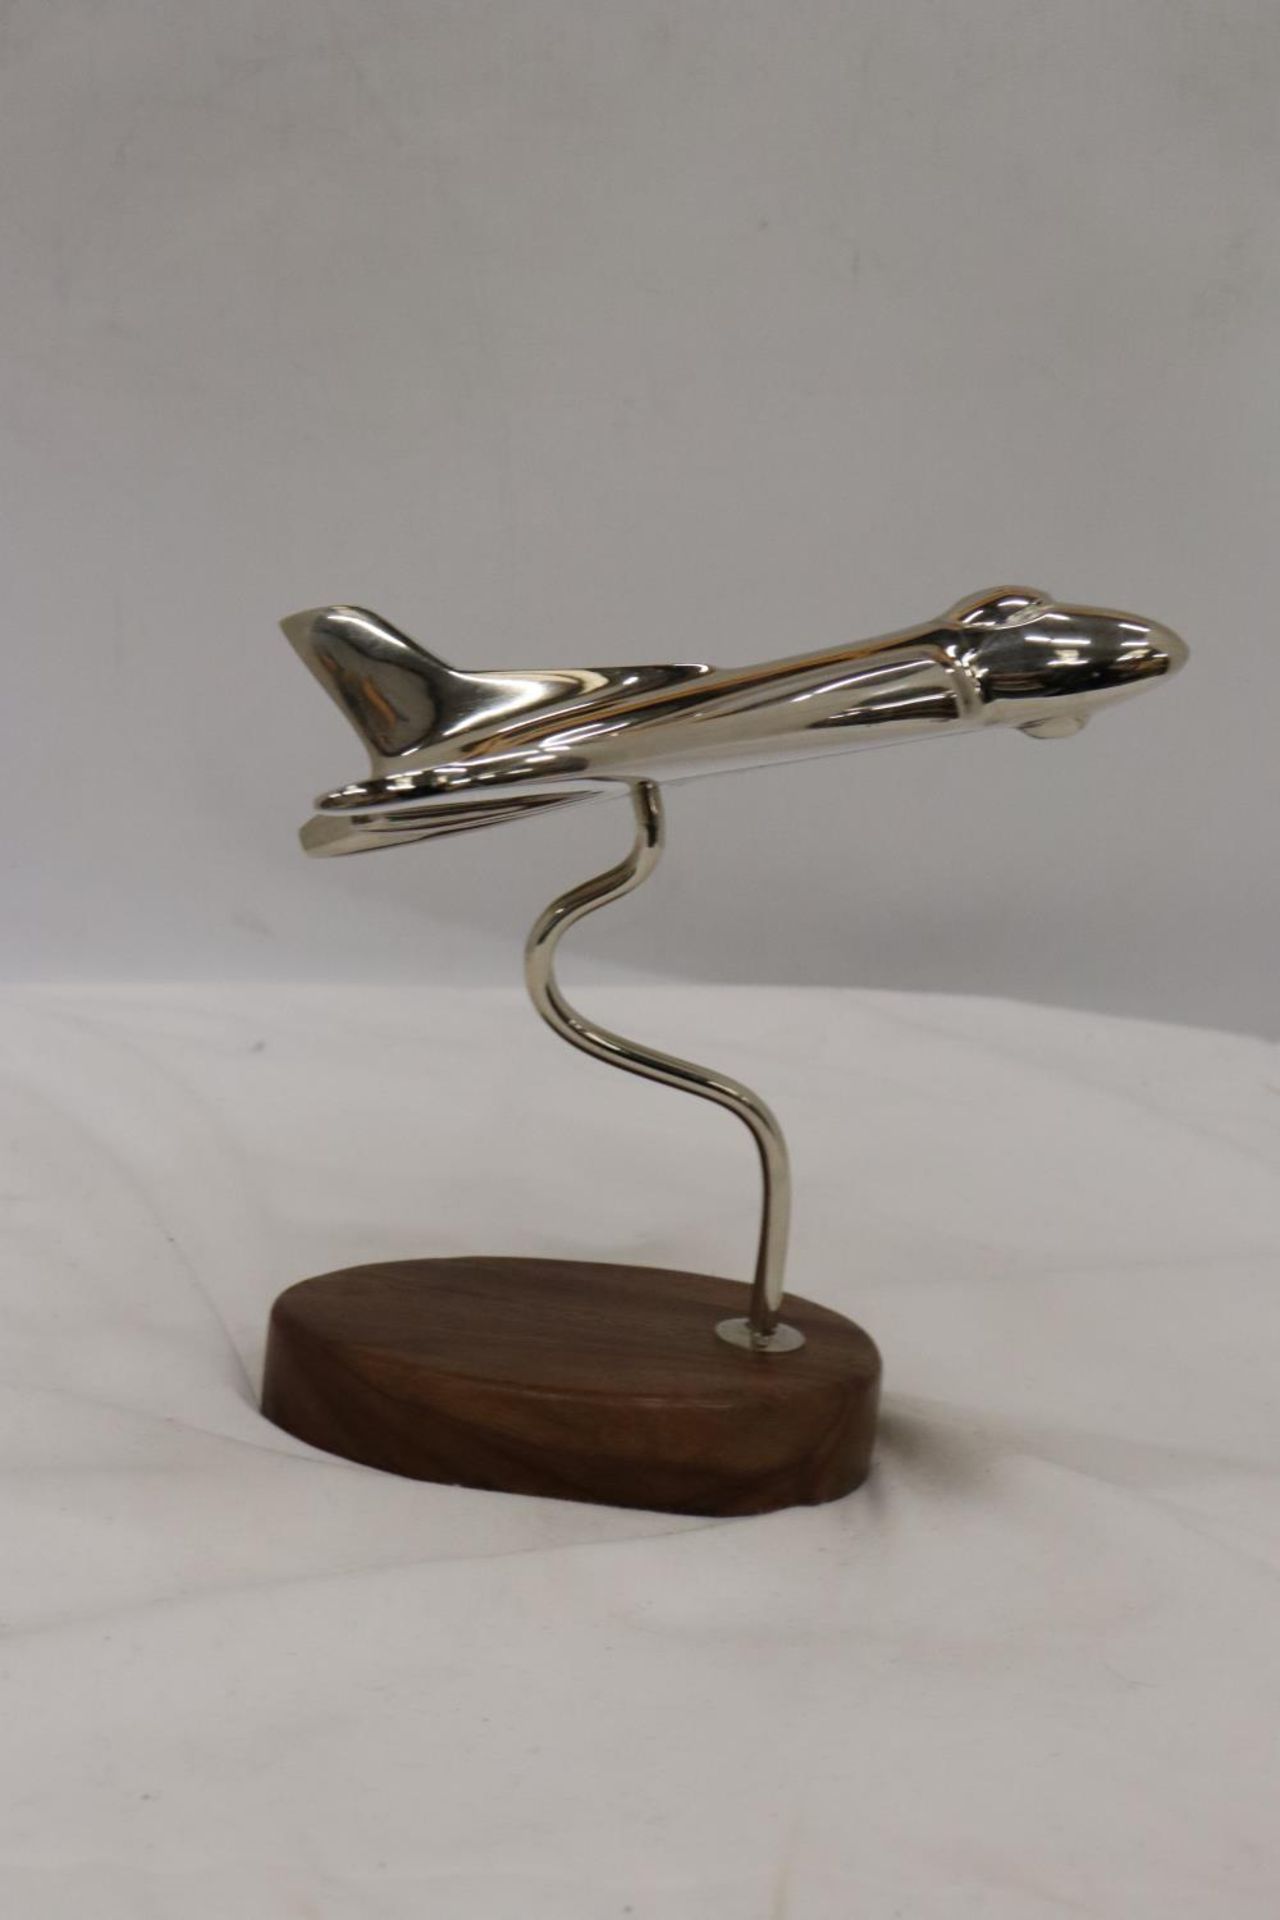 A CHROME MODEL OF AN AVRO VULCAN AEROPLANE ON A HARDWOOD BASE WITH HISTORY PLAQUE, HEIGHT 20 CM - Image 5 of 6